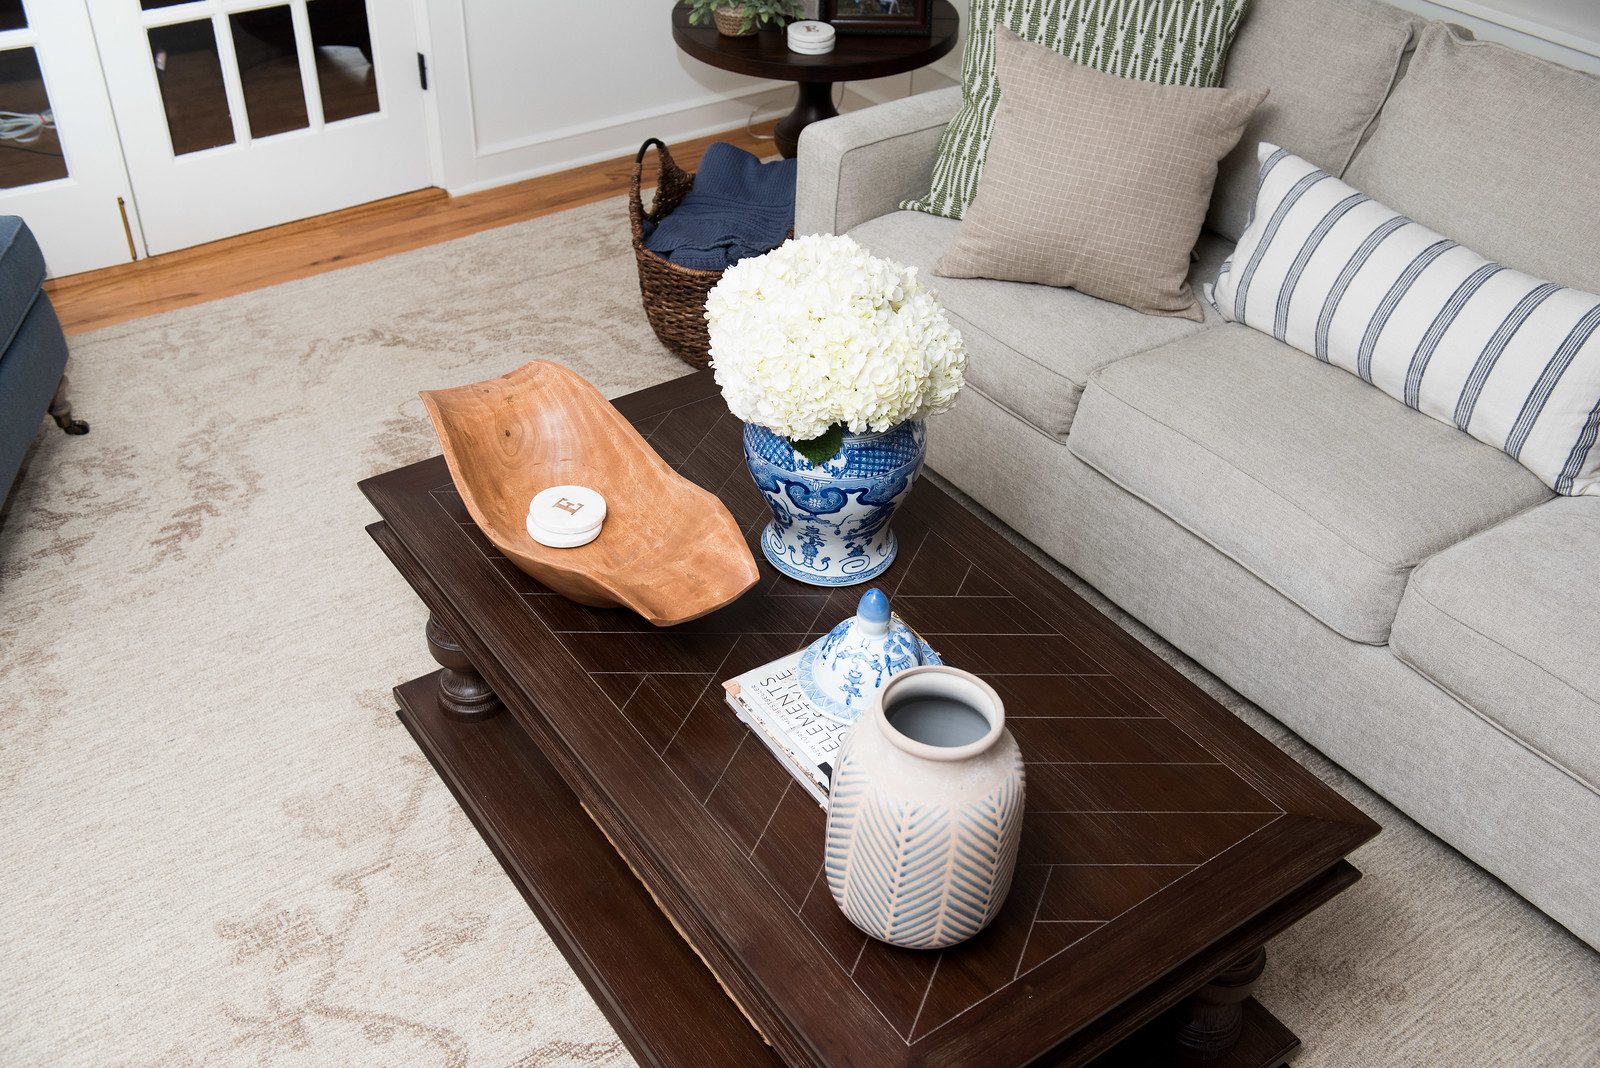 A coffee table with flowers and a vase on it.